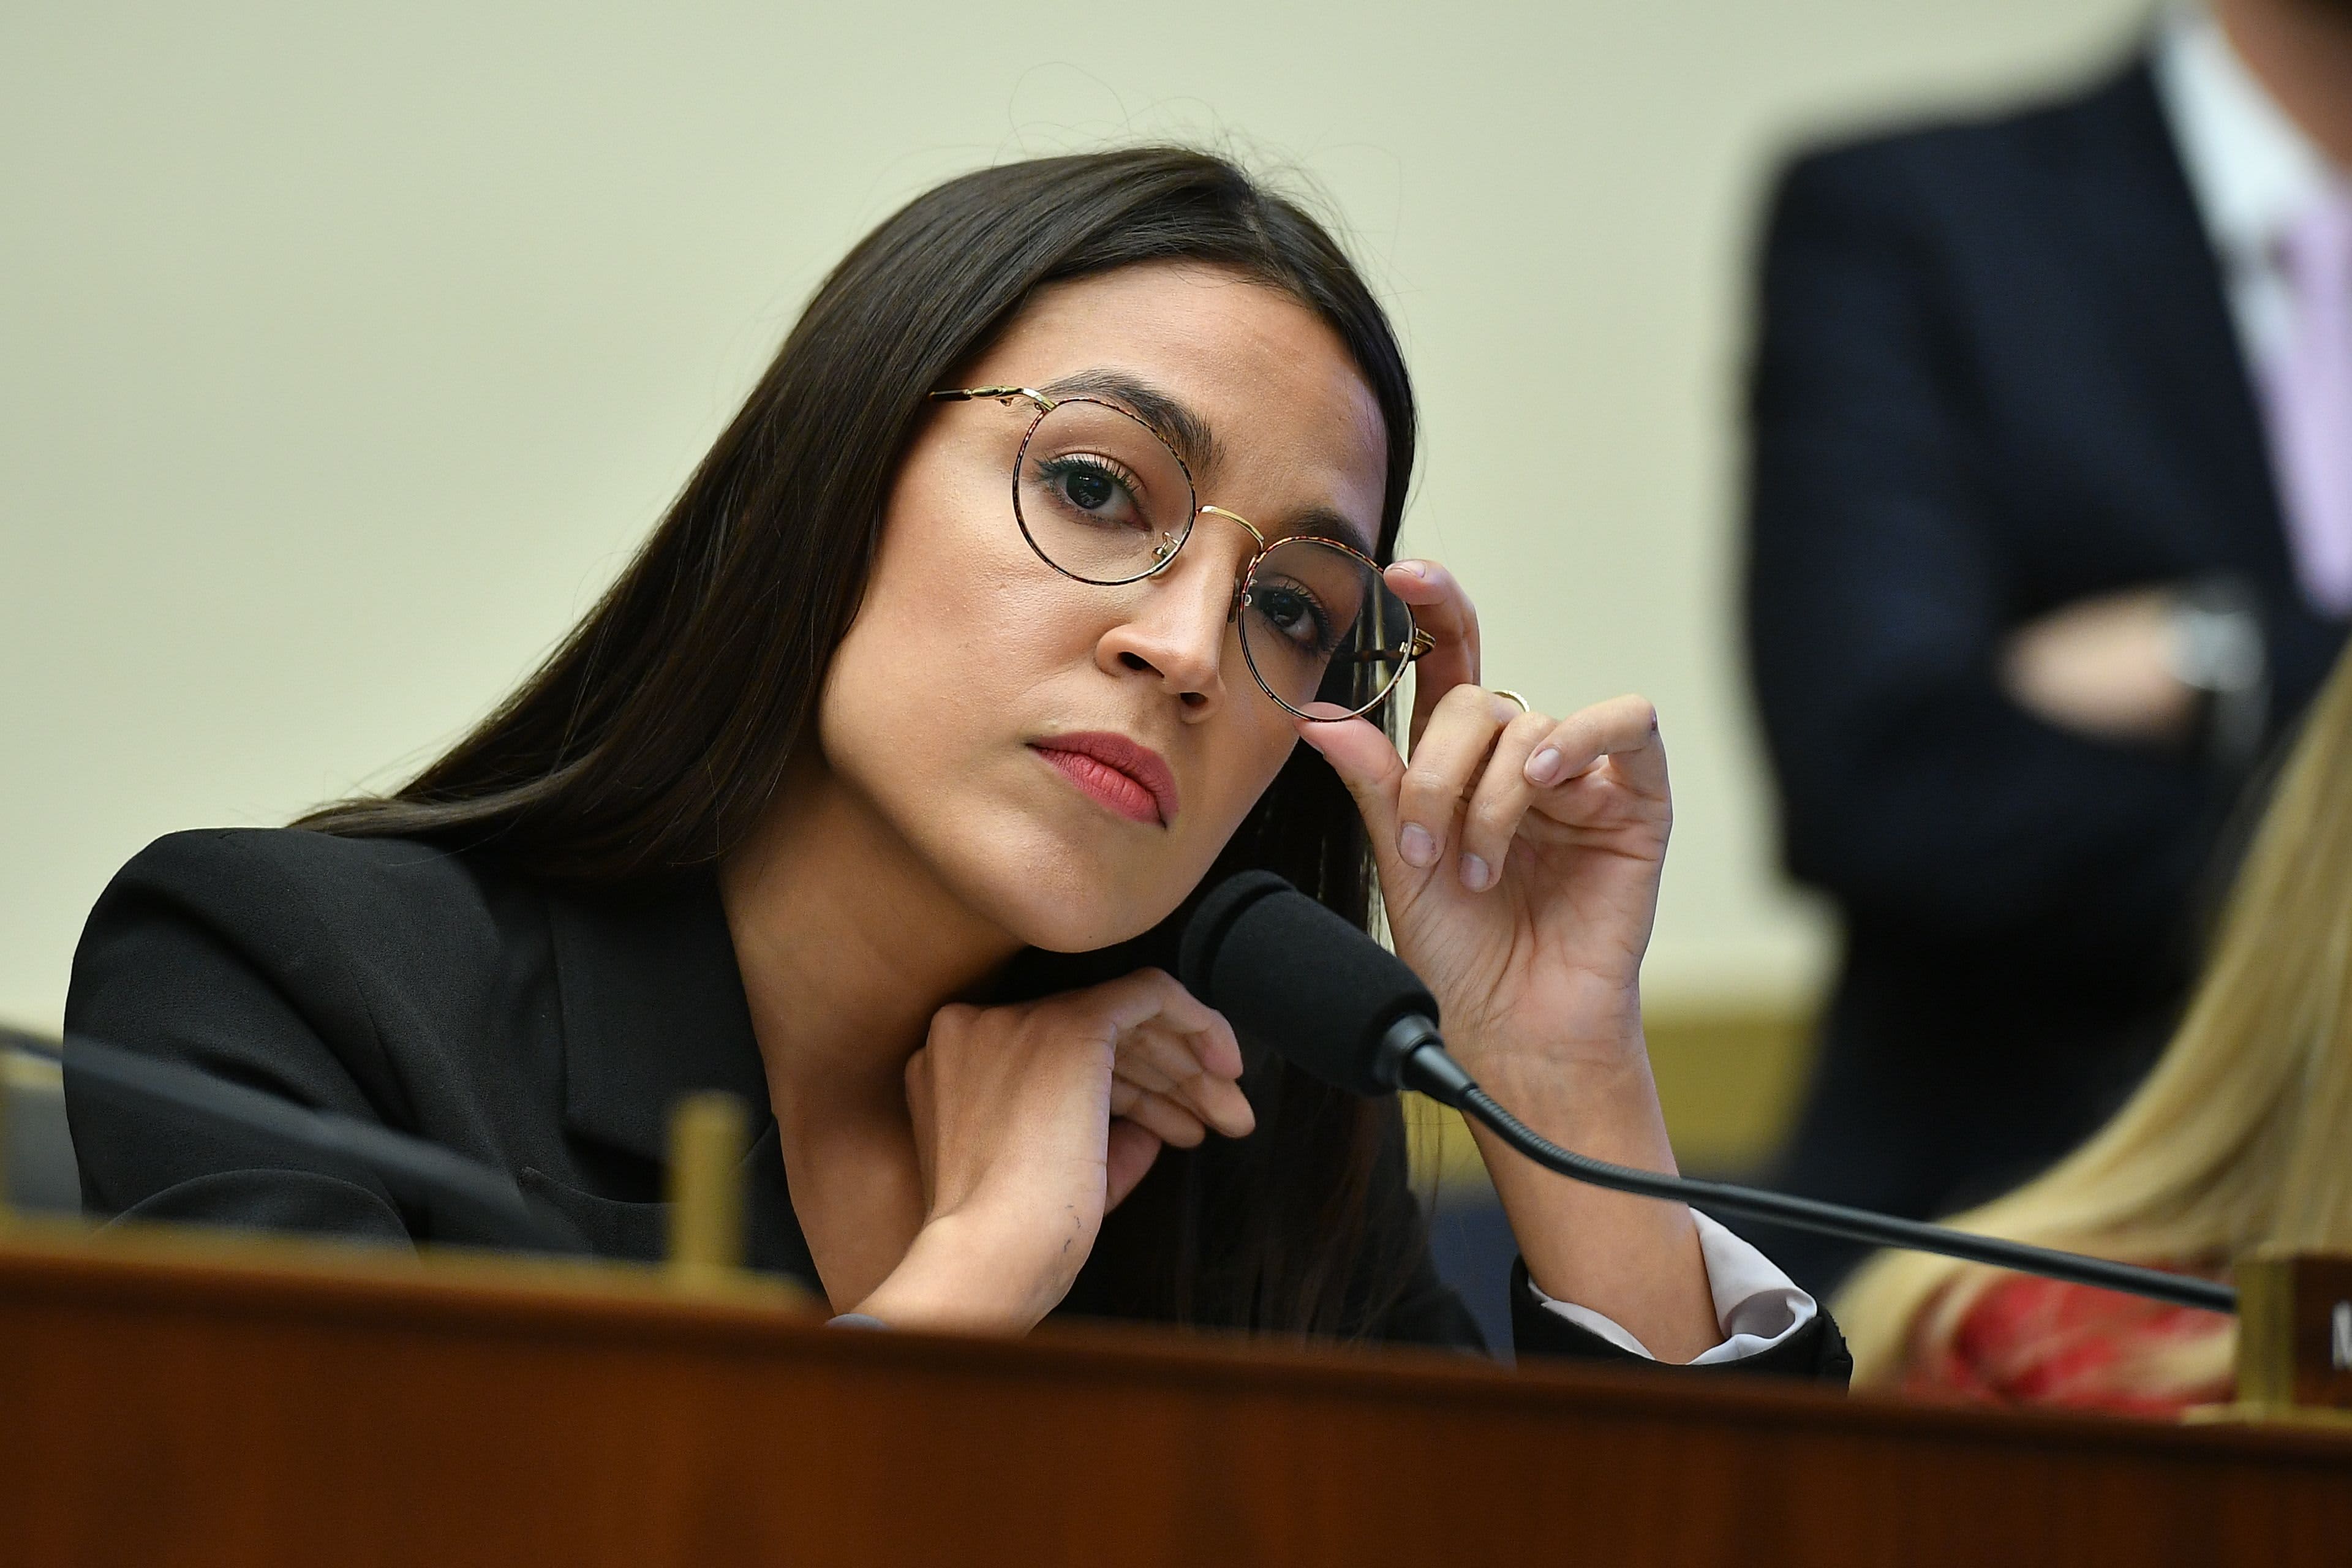 Need to heal from burnout? Alexandria Ocasio-Cortez's tips are surprisingly useful, according to a burnout coach